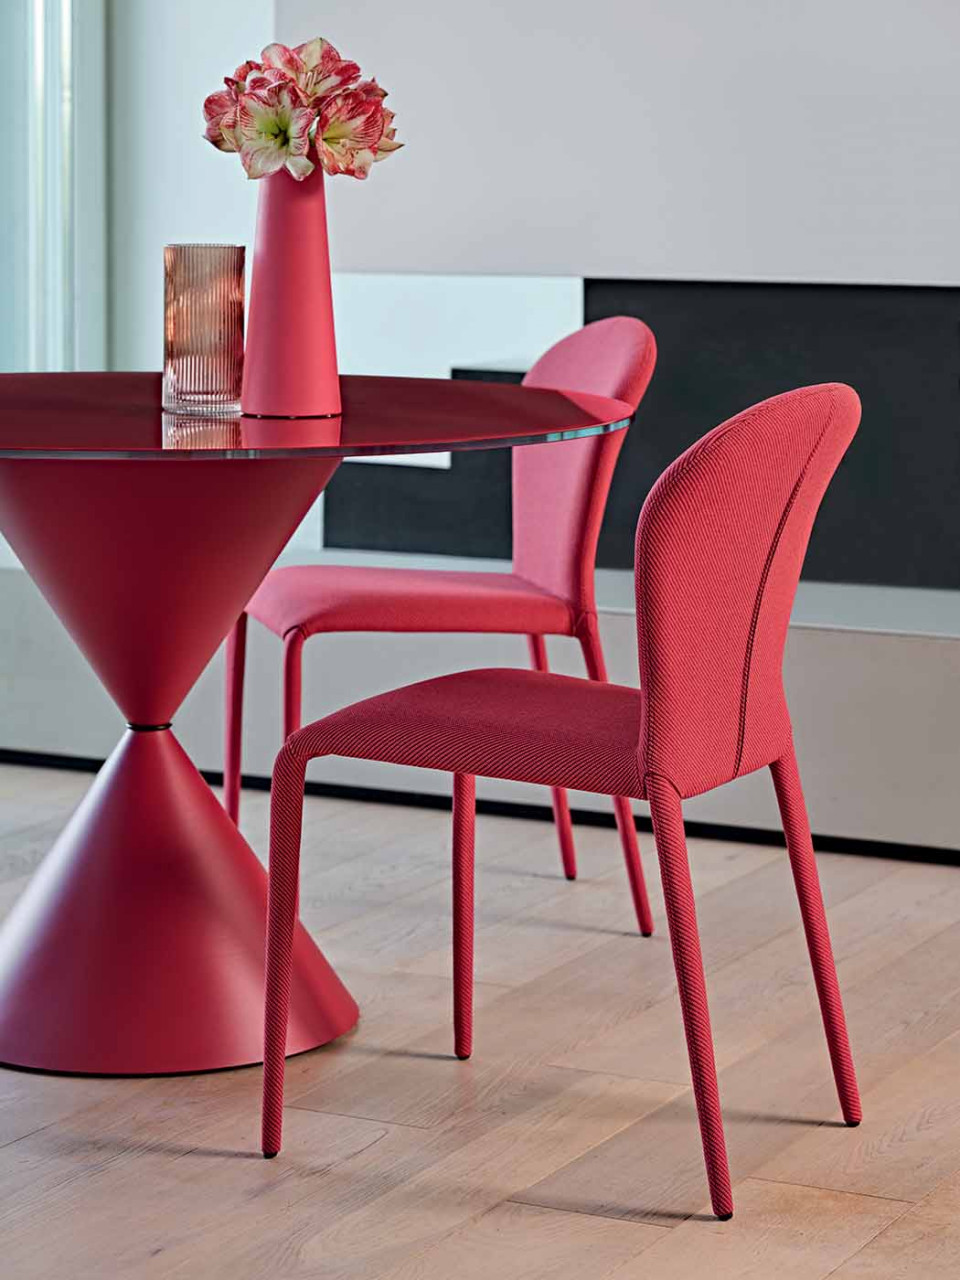 Soffio chair in red